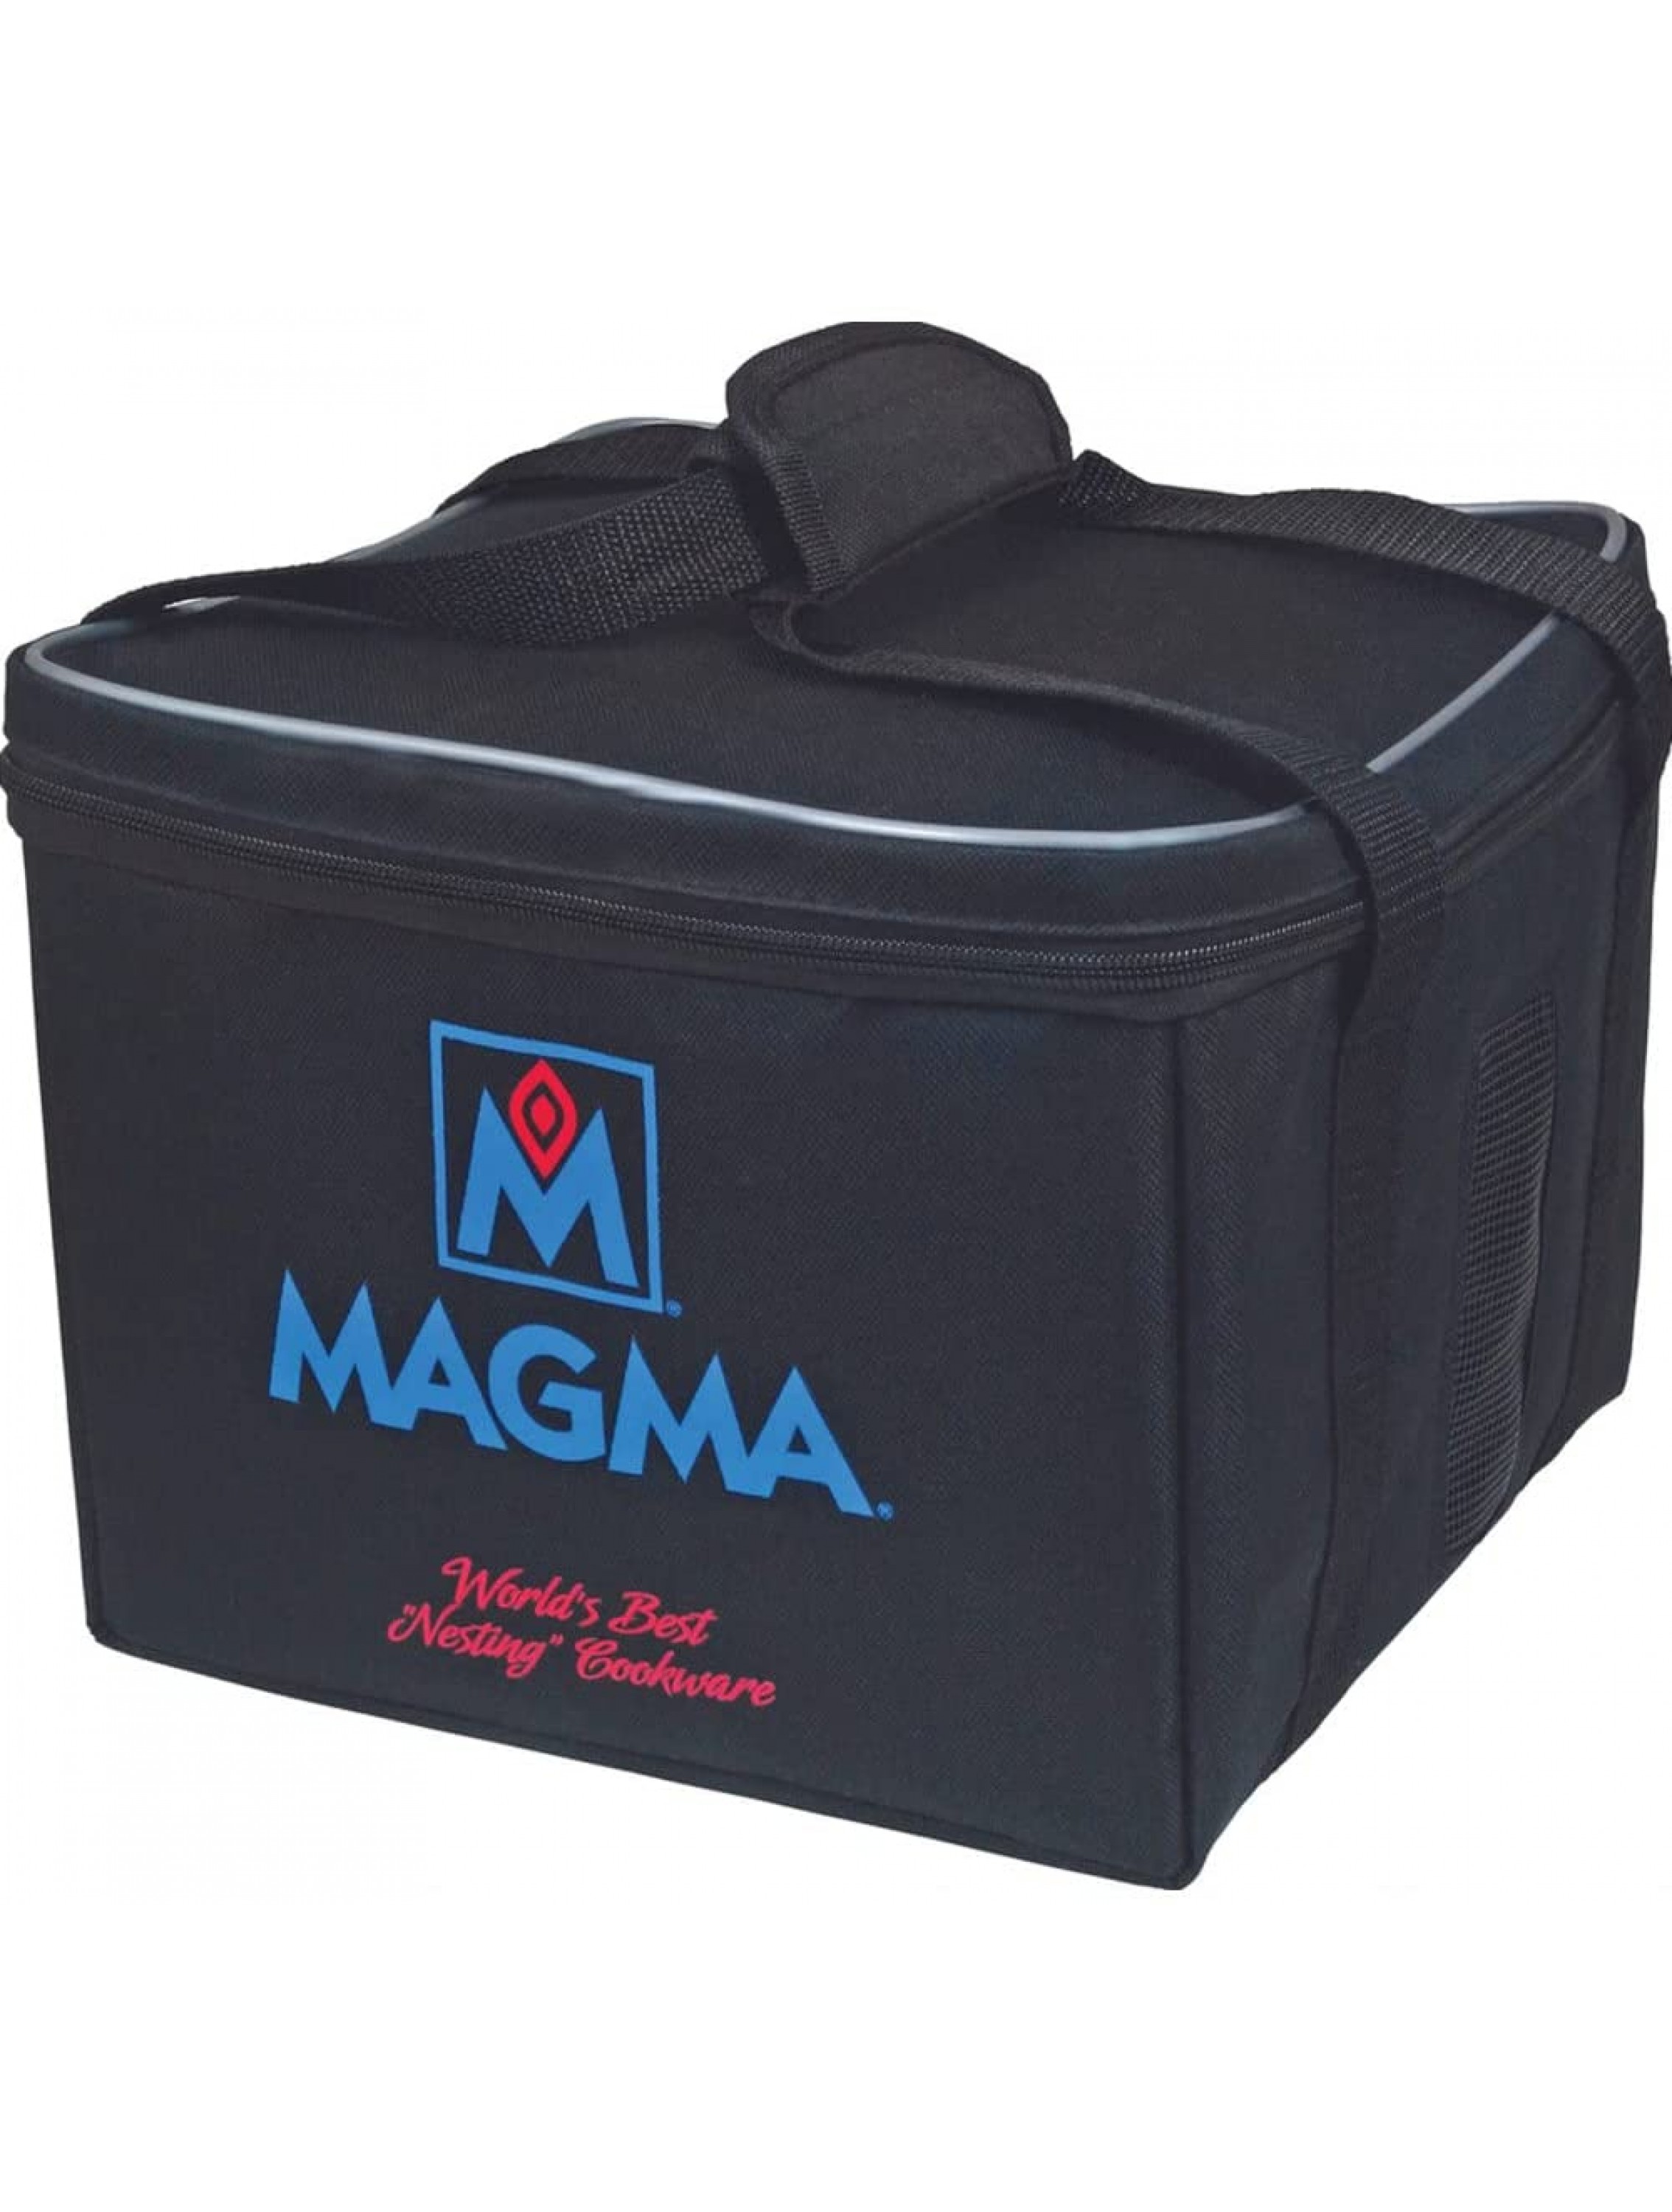 Magma A10-364 Padded Carry Case for Nesting Cookware Sets and Accessories - BZT7LG2TO